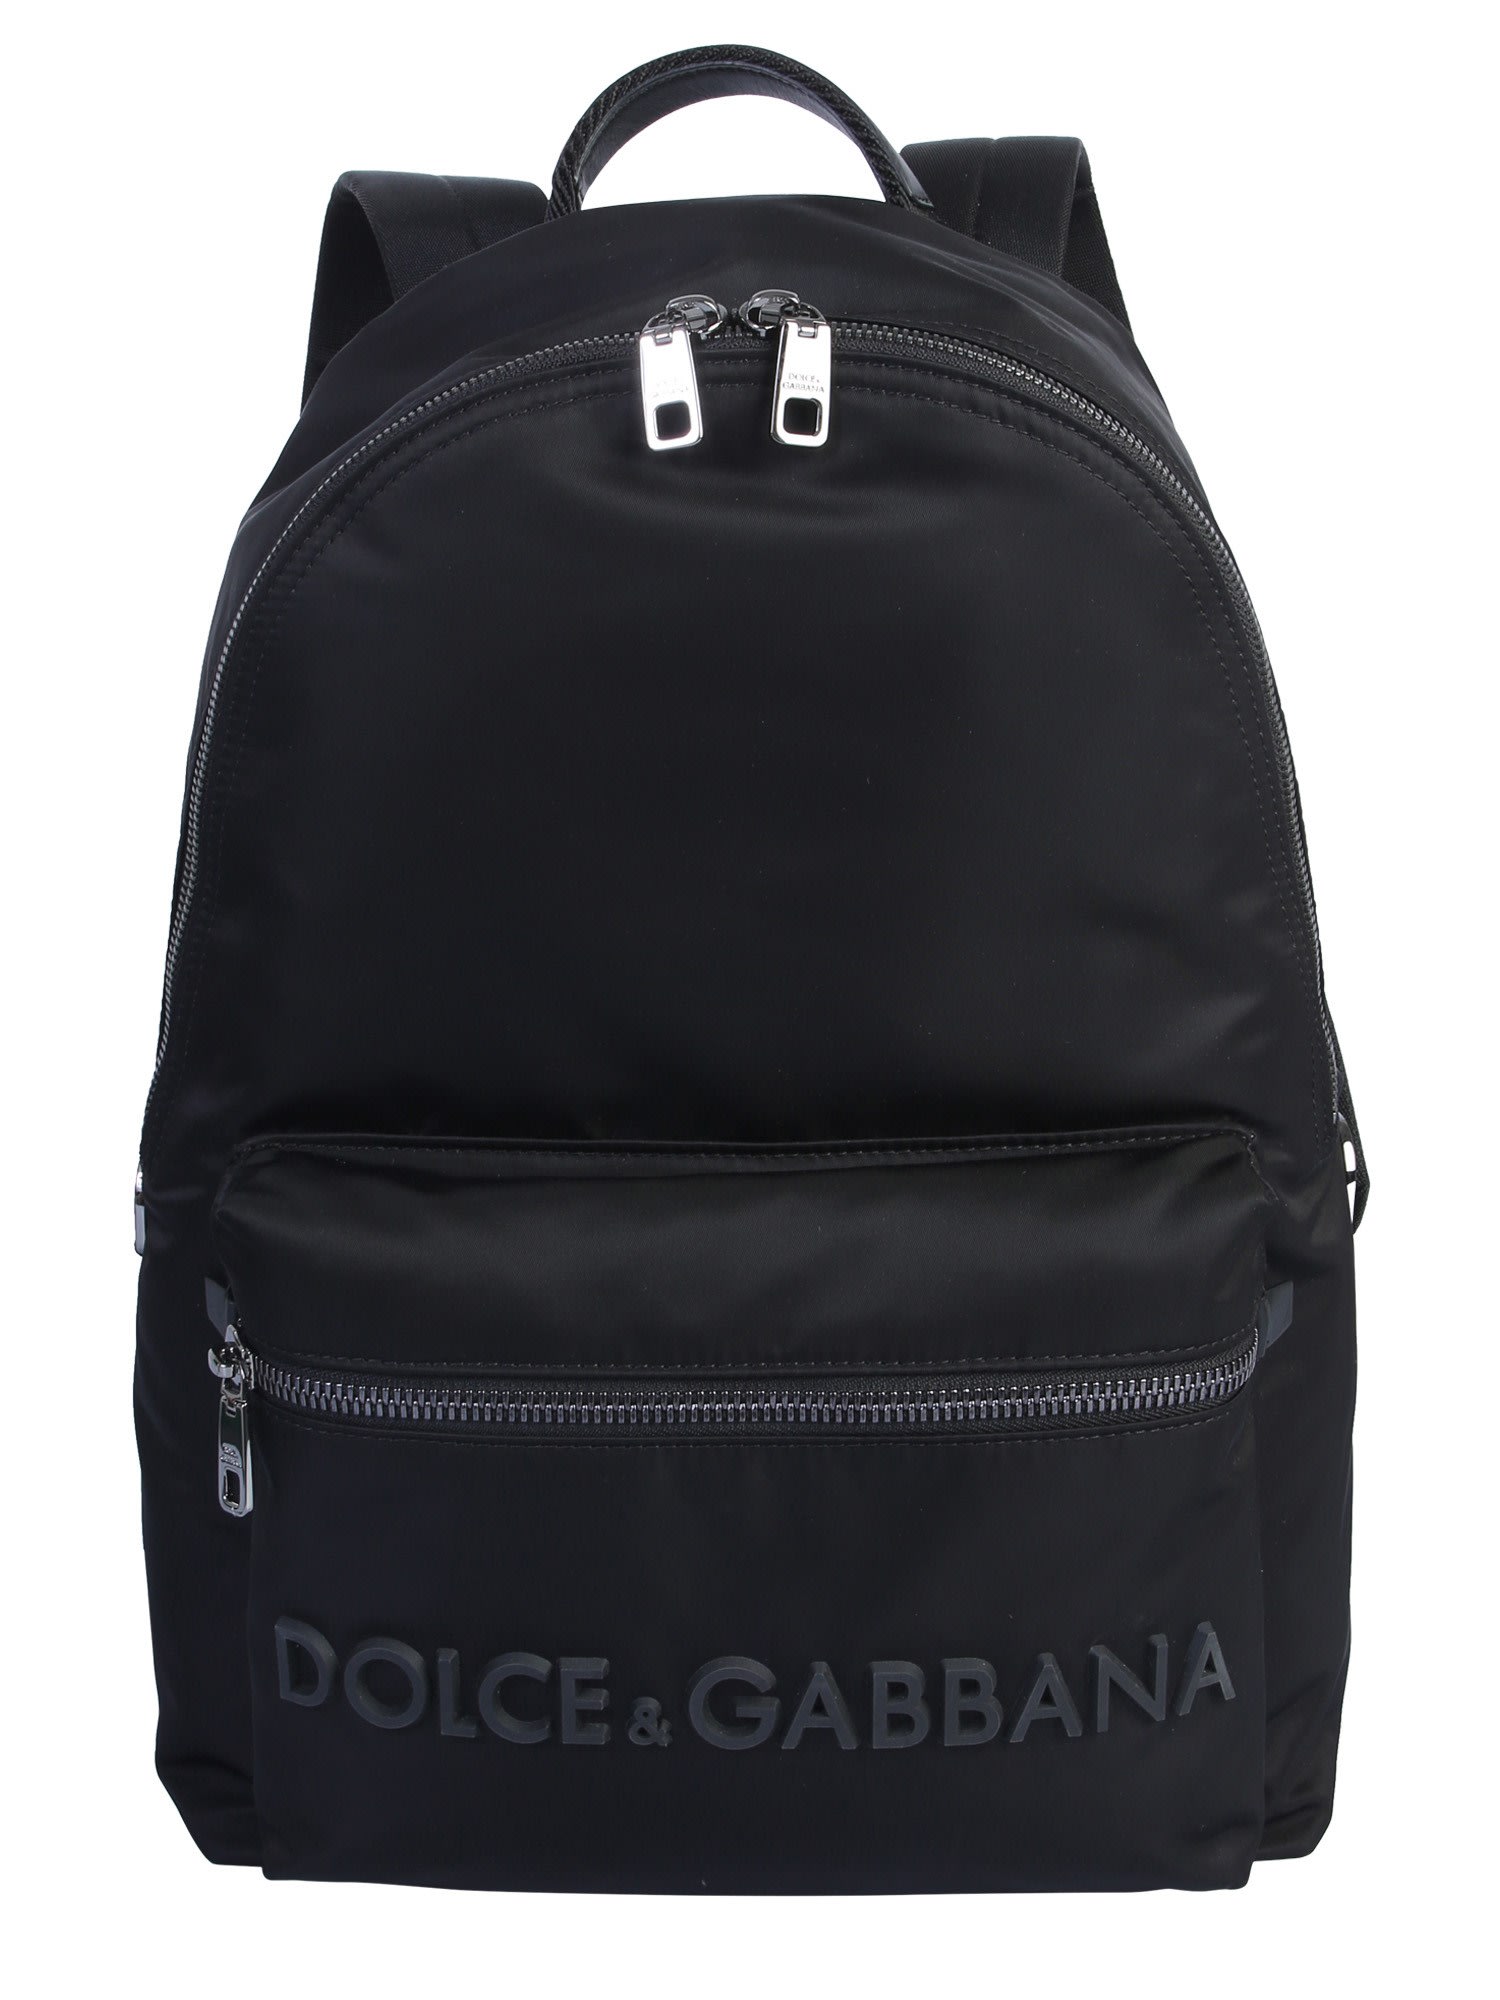 dolce and gabbana backpack sale